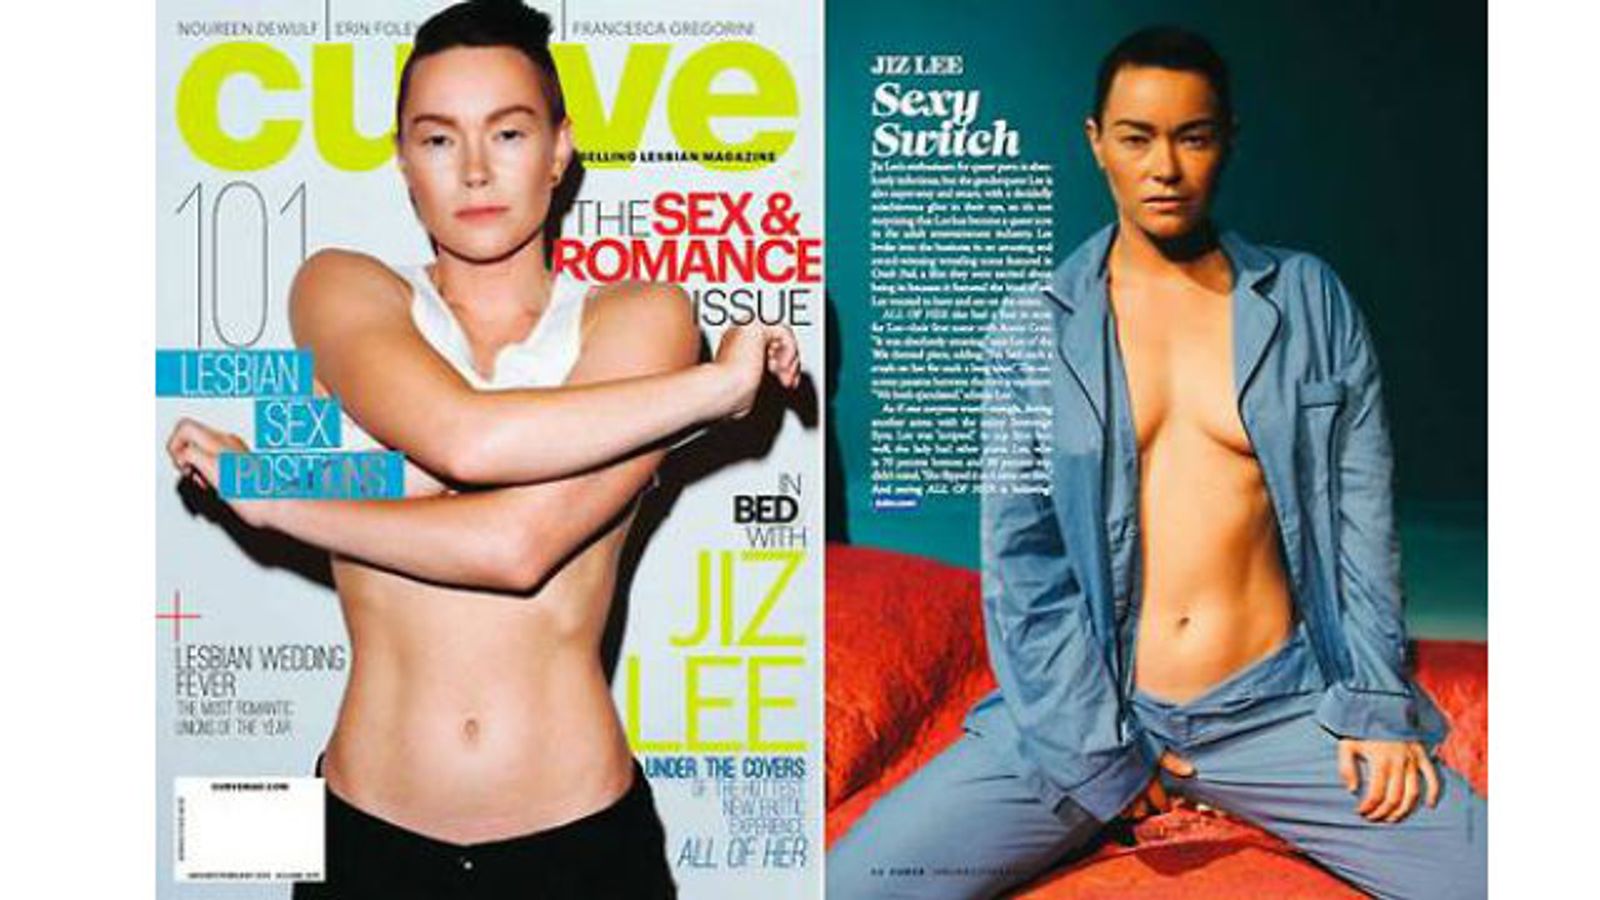 Curve Mag Jan/Feb Issue Features Jiz Lee on the Cover